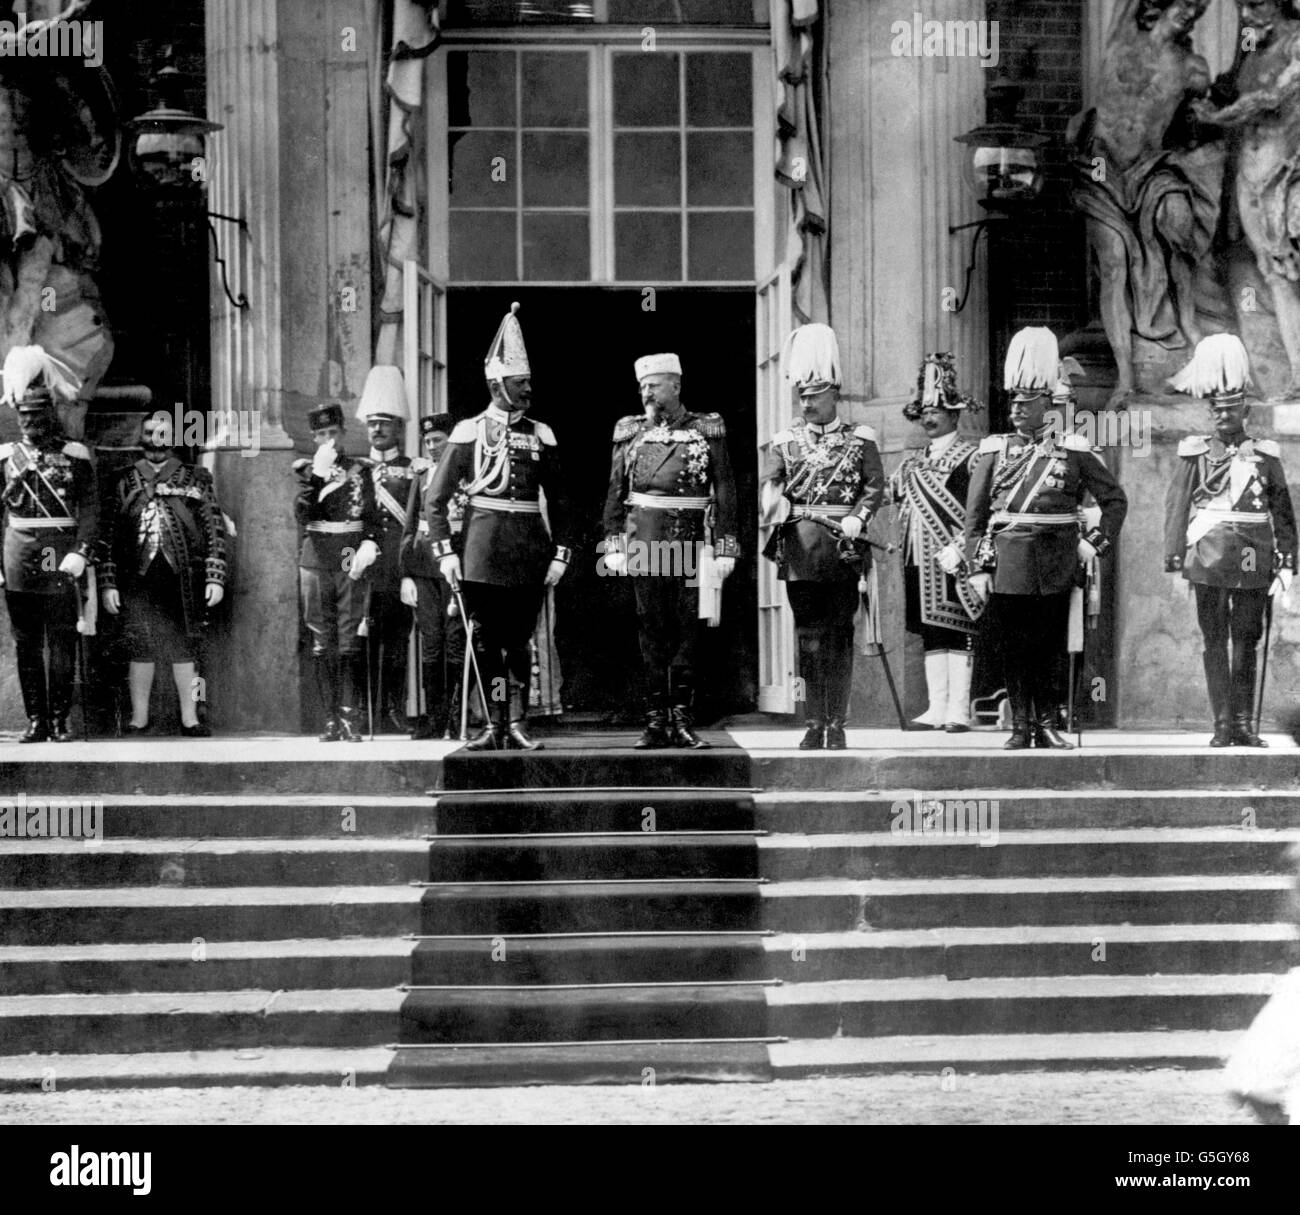 King Ferdinand of Bulgaria and Kaiser Wilhelm II stand side-by-side at a march past. The third and fifth figures from the left of the picture are the Crown Prince Boris and Prince Cyril of Bulgaria. Stock Photo